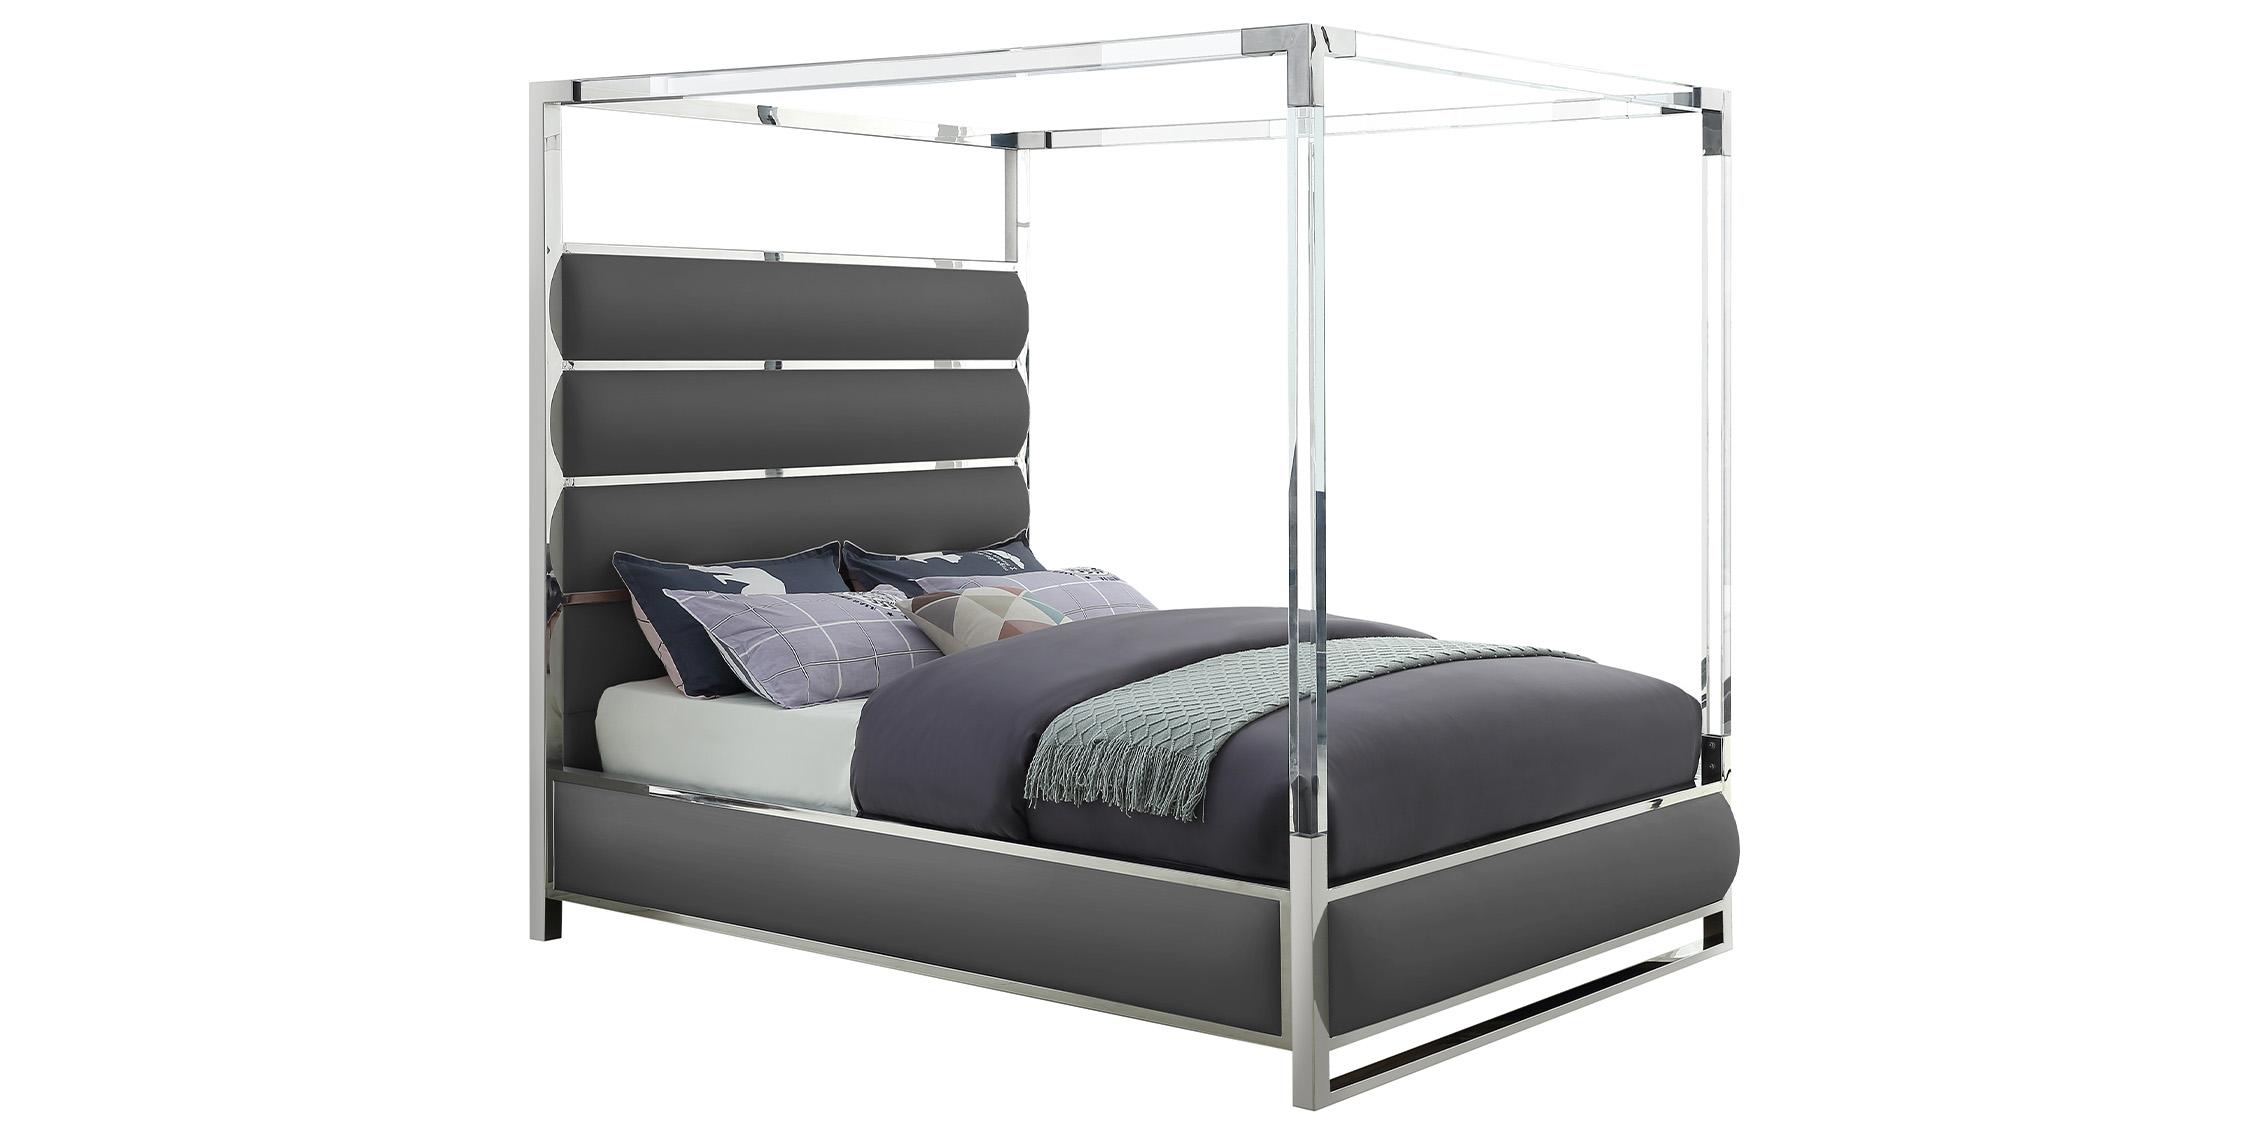 Contemporary Canopy Bed ENCORE Grey-Q EncoreGrey-Q in Gray Faux Leather